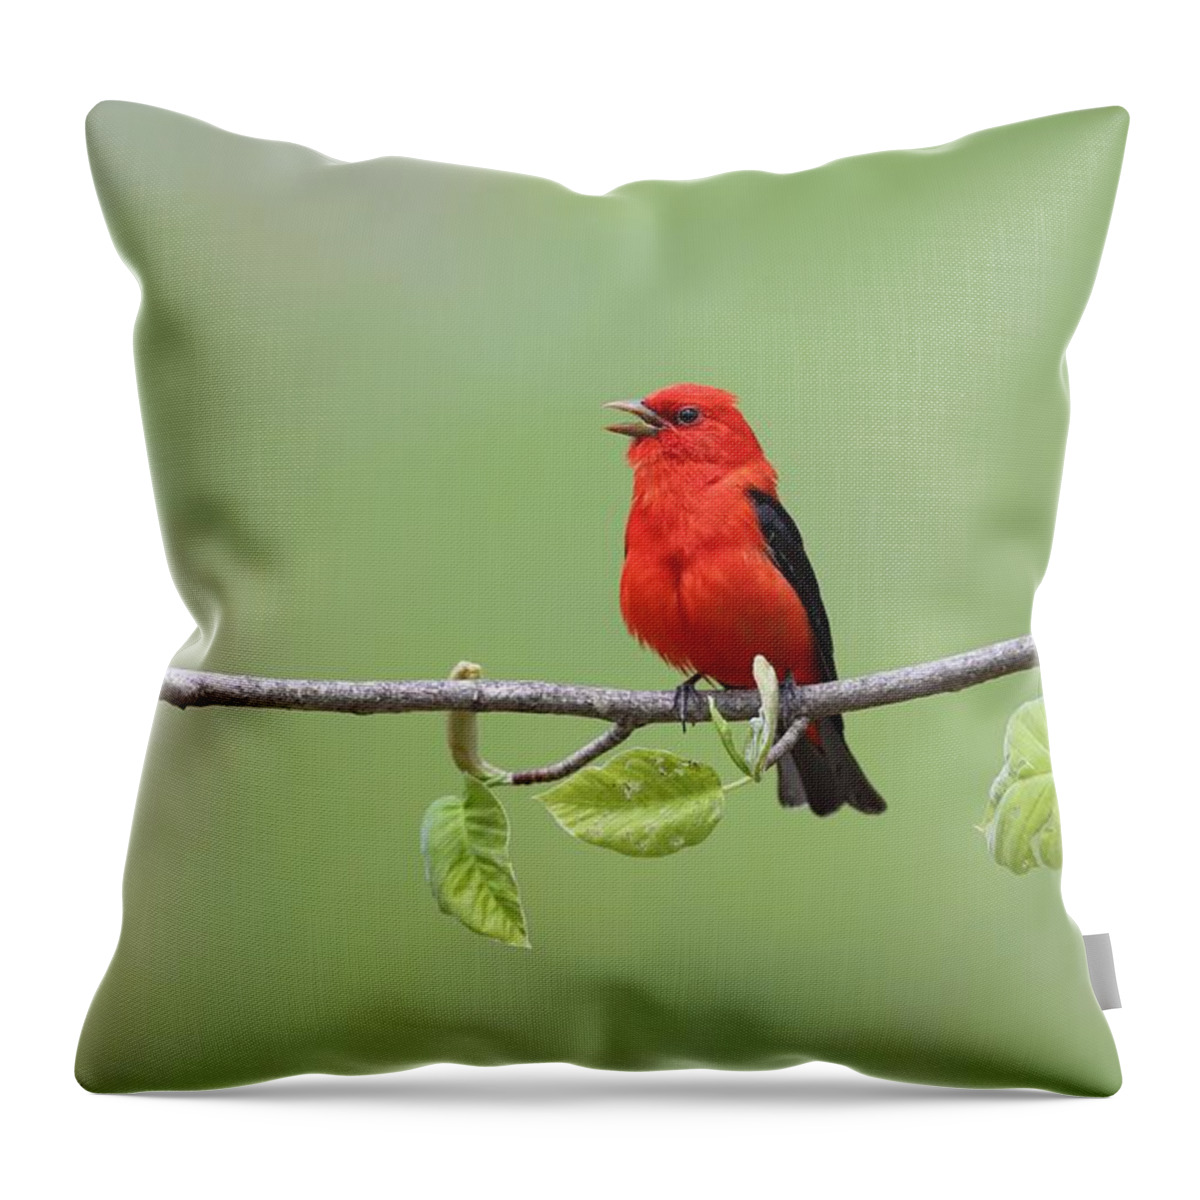 Scarlet Tanager Throw Pillow featuring the photograph Scarlet Tanager by Daniel Behm